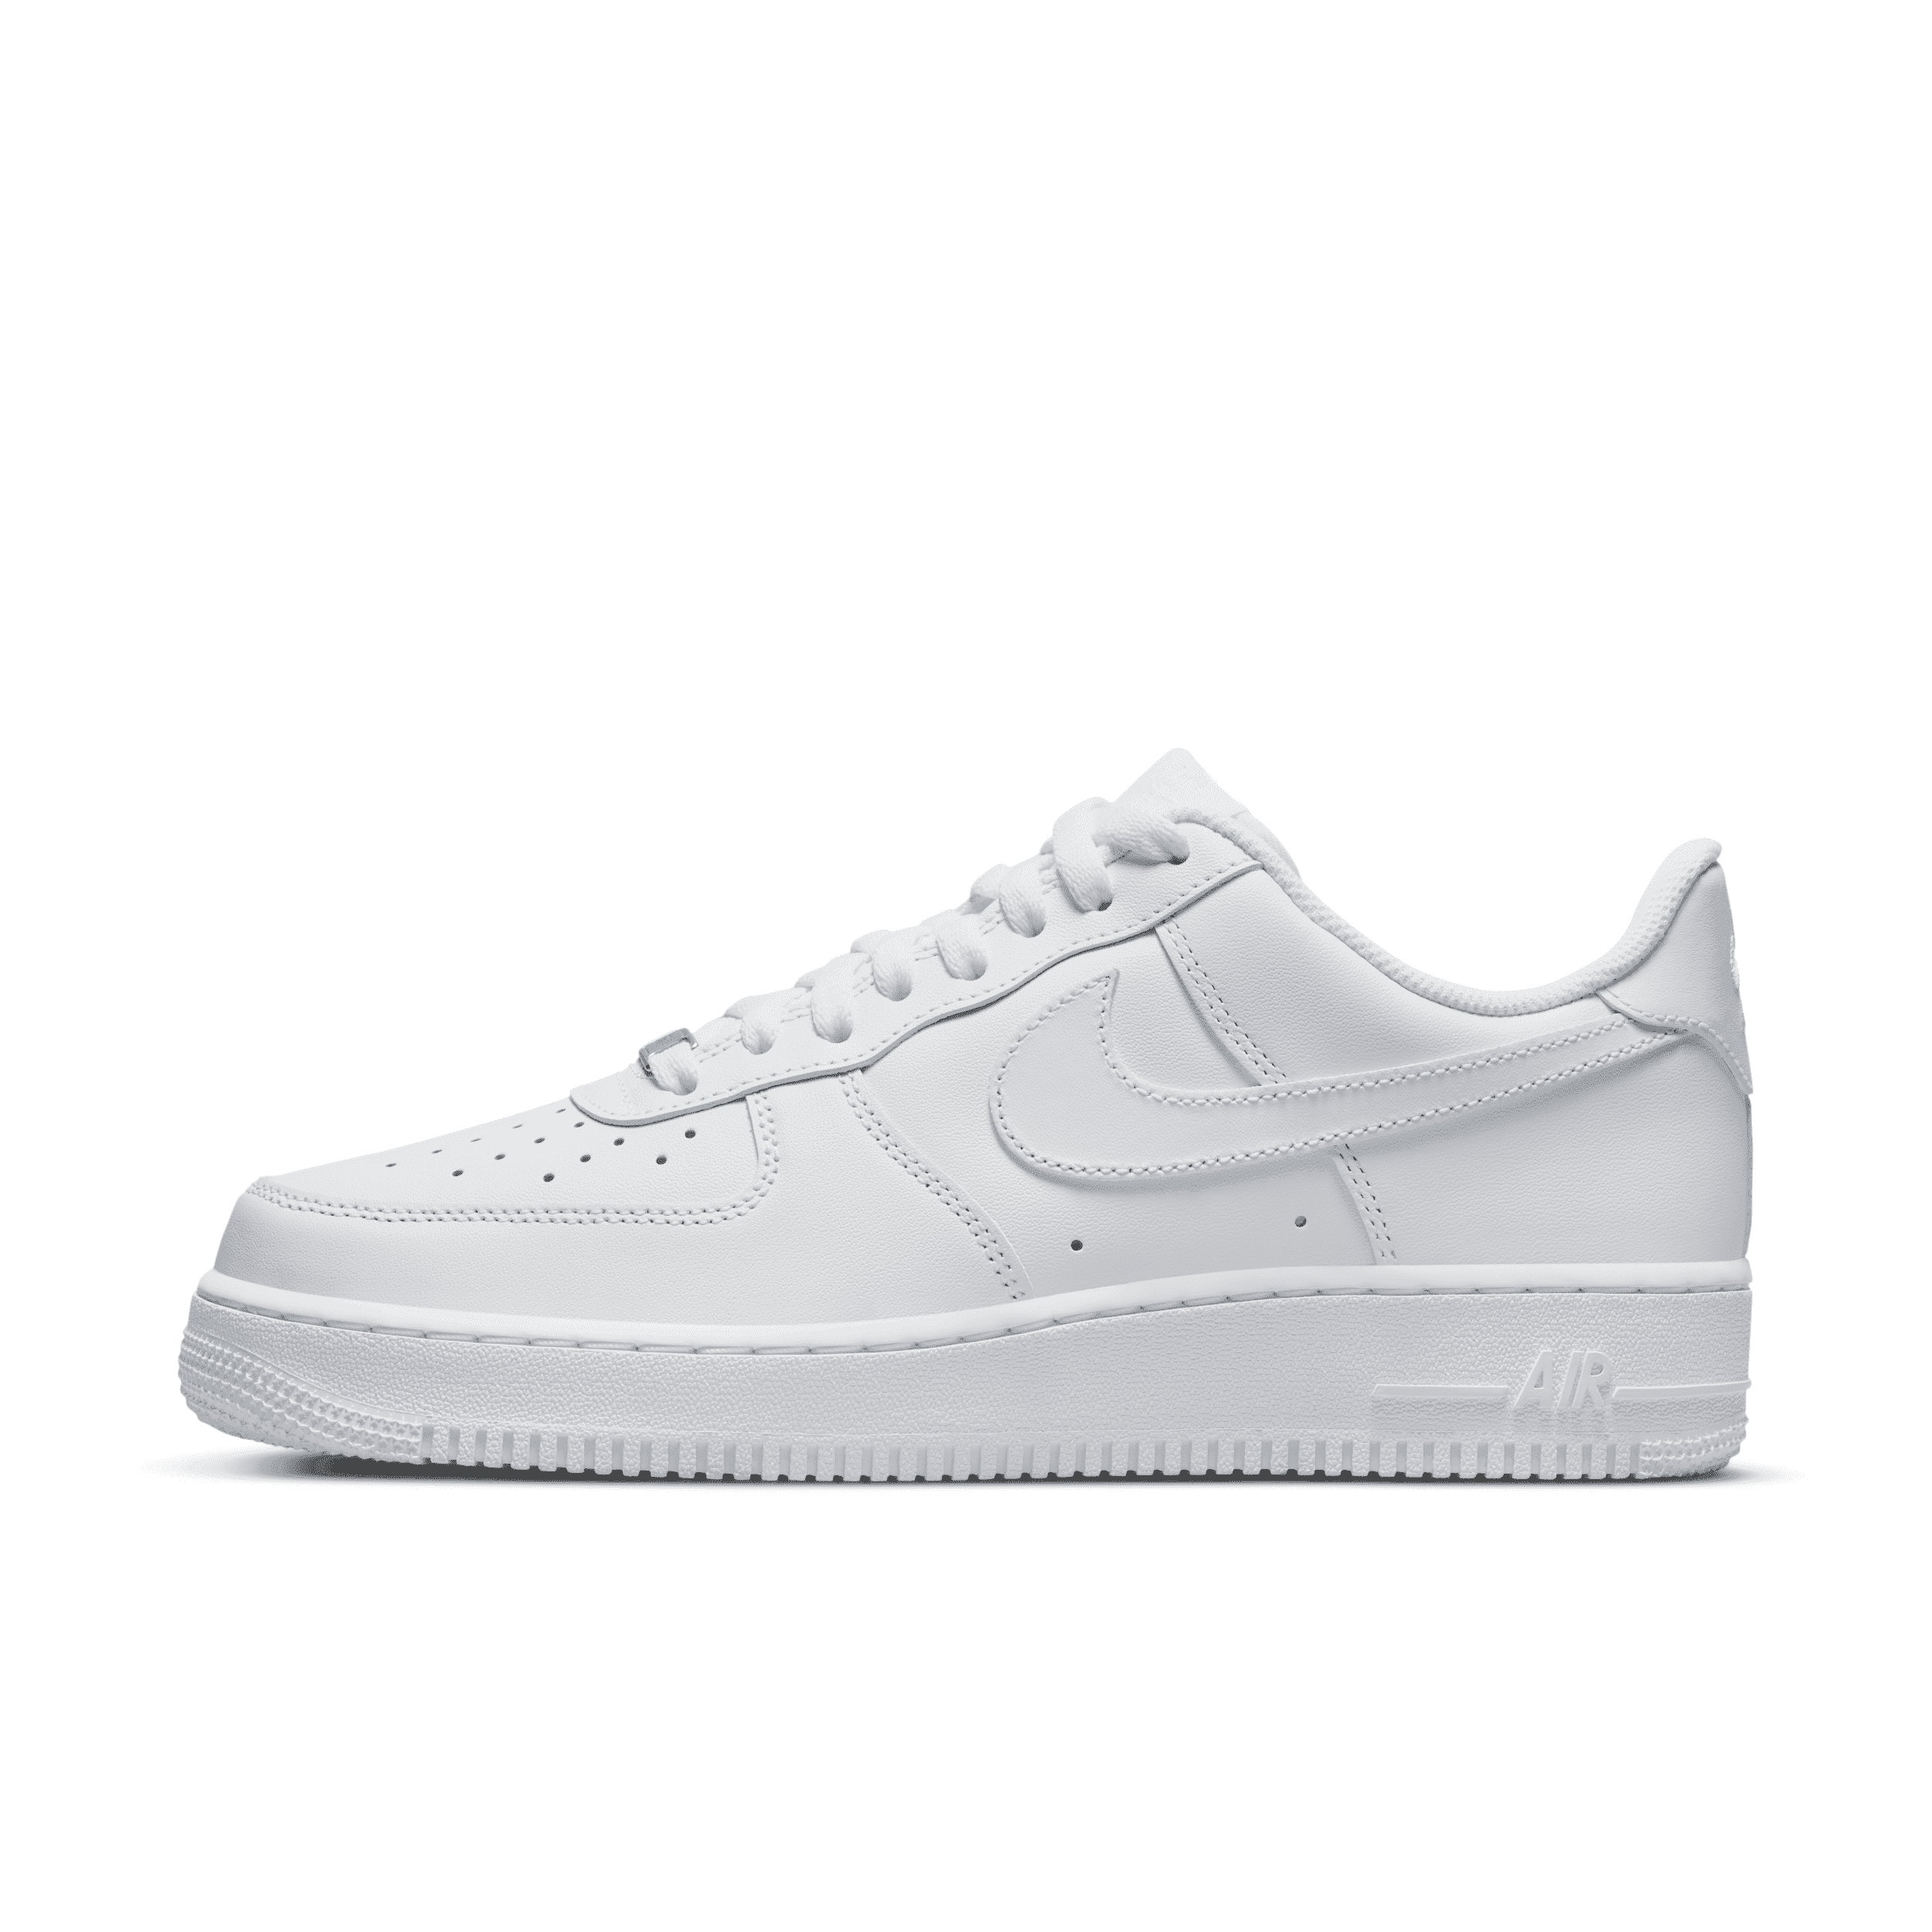 Nike Men's Air Force 1 '07 Shoes in White, Size: 8.5 | CW2288-111